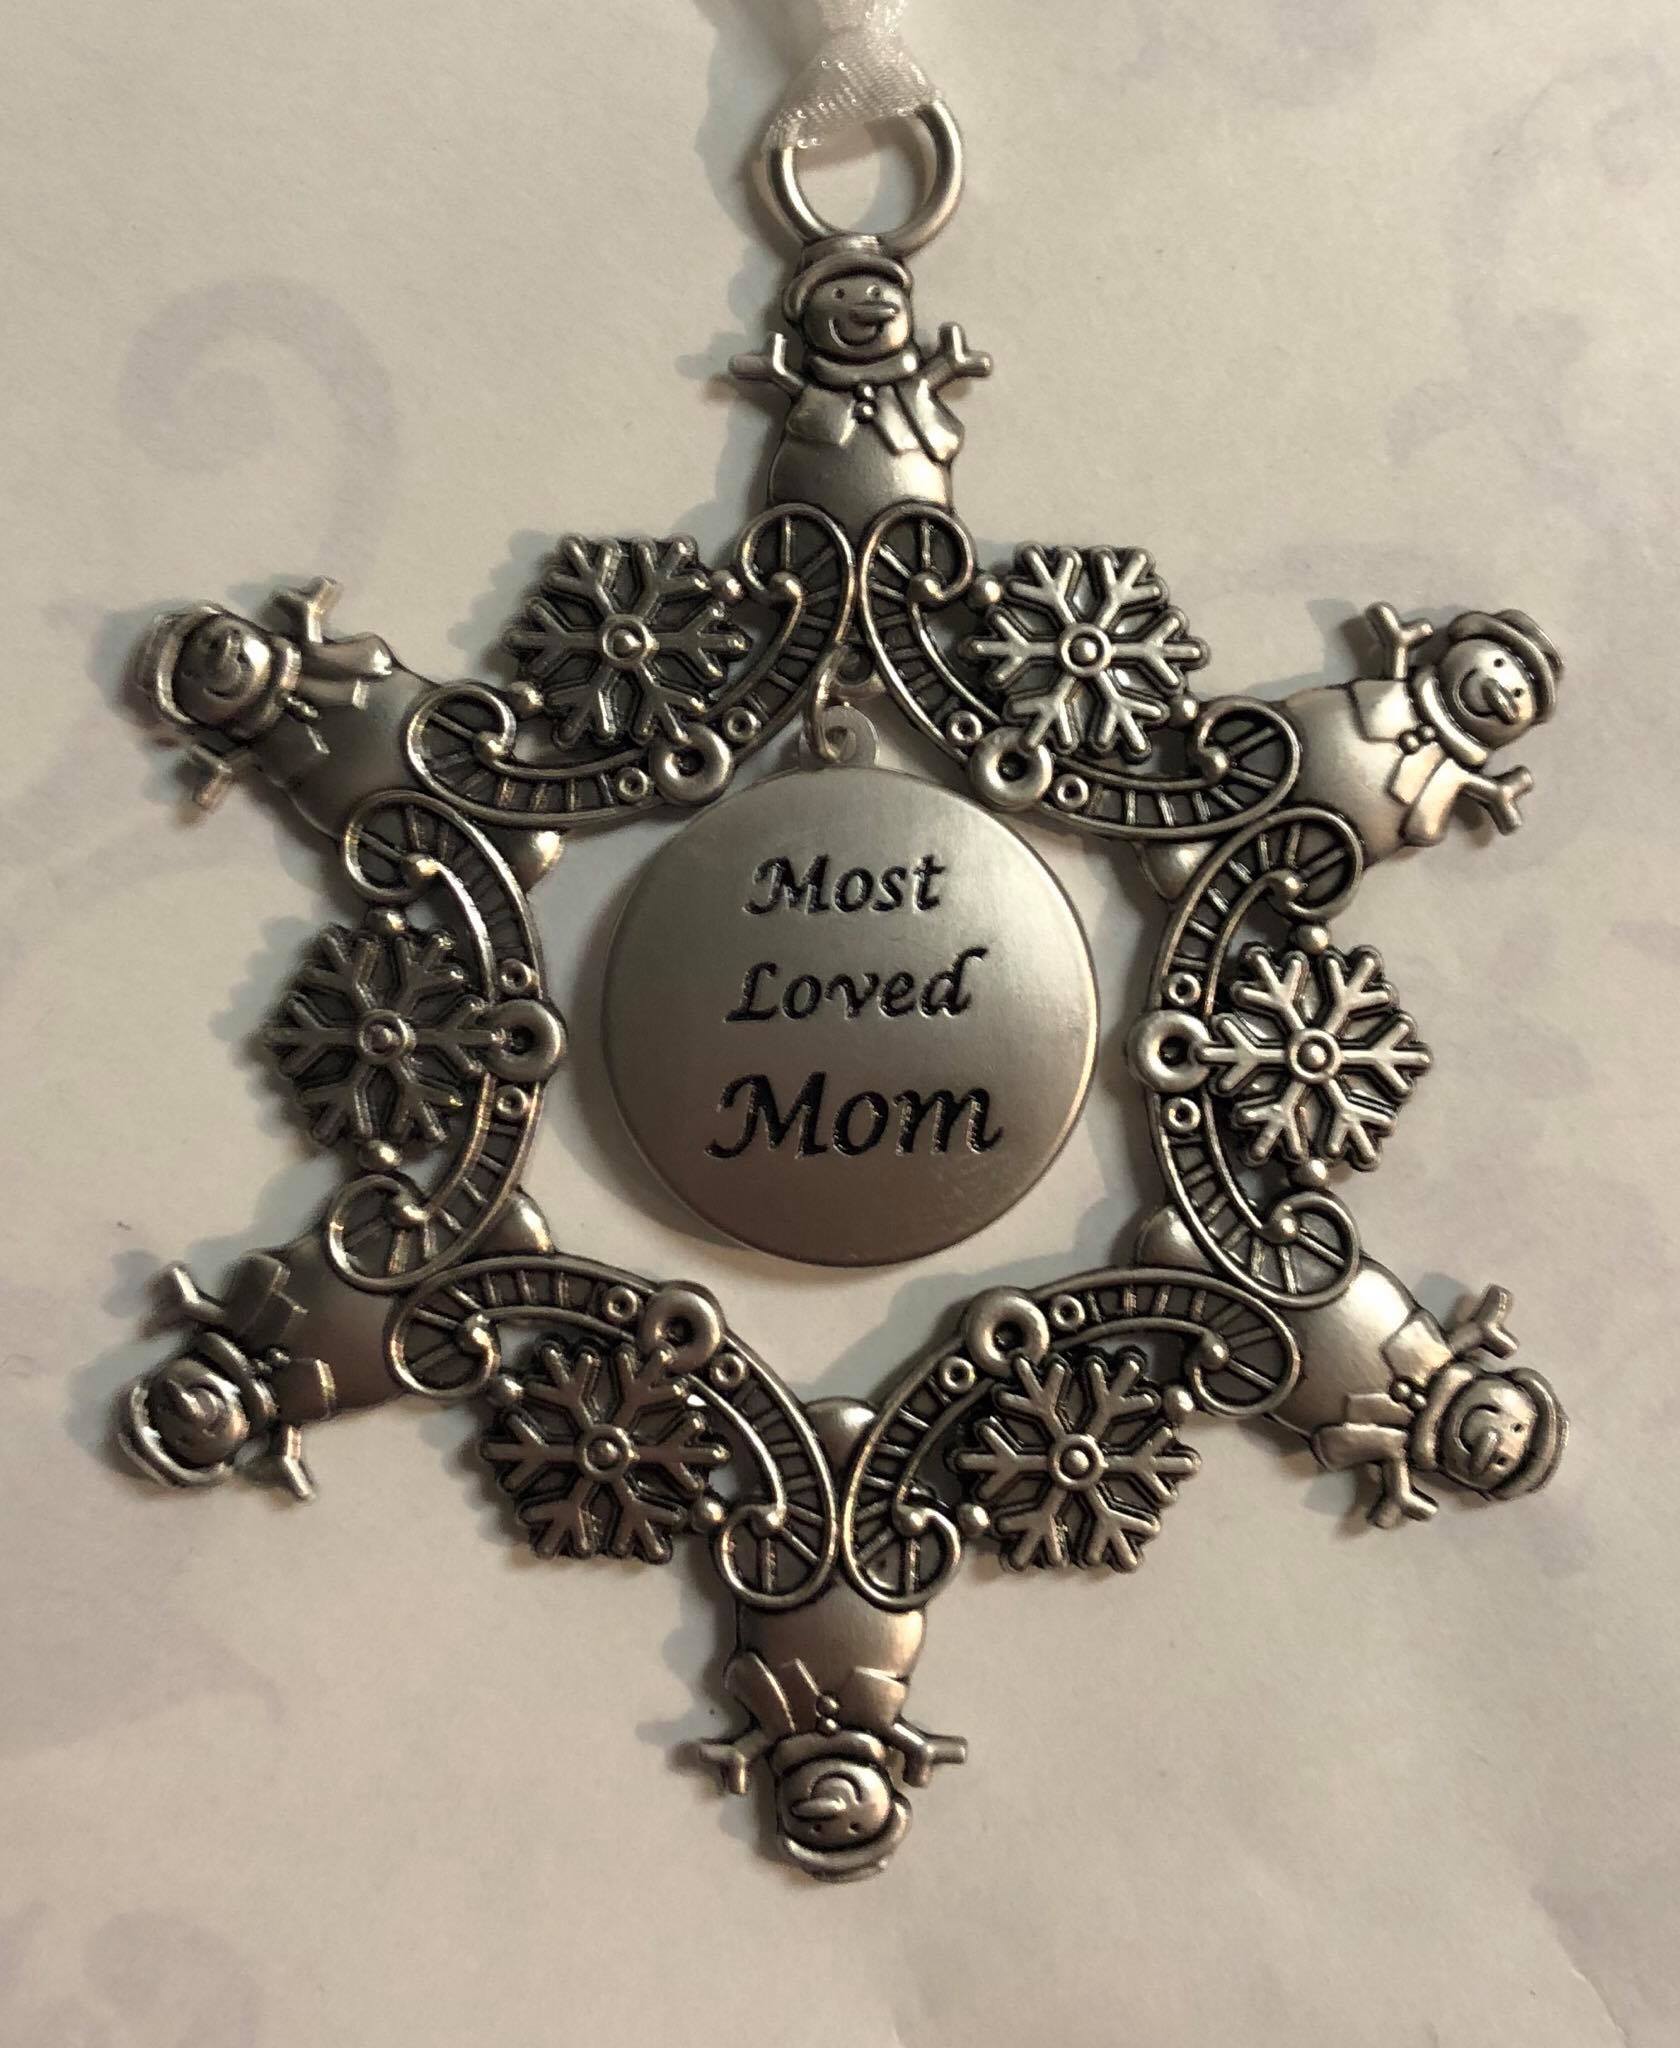 Snowflake Photo Tree Ornament "Most Loved Mom"